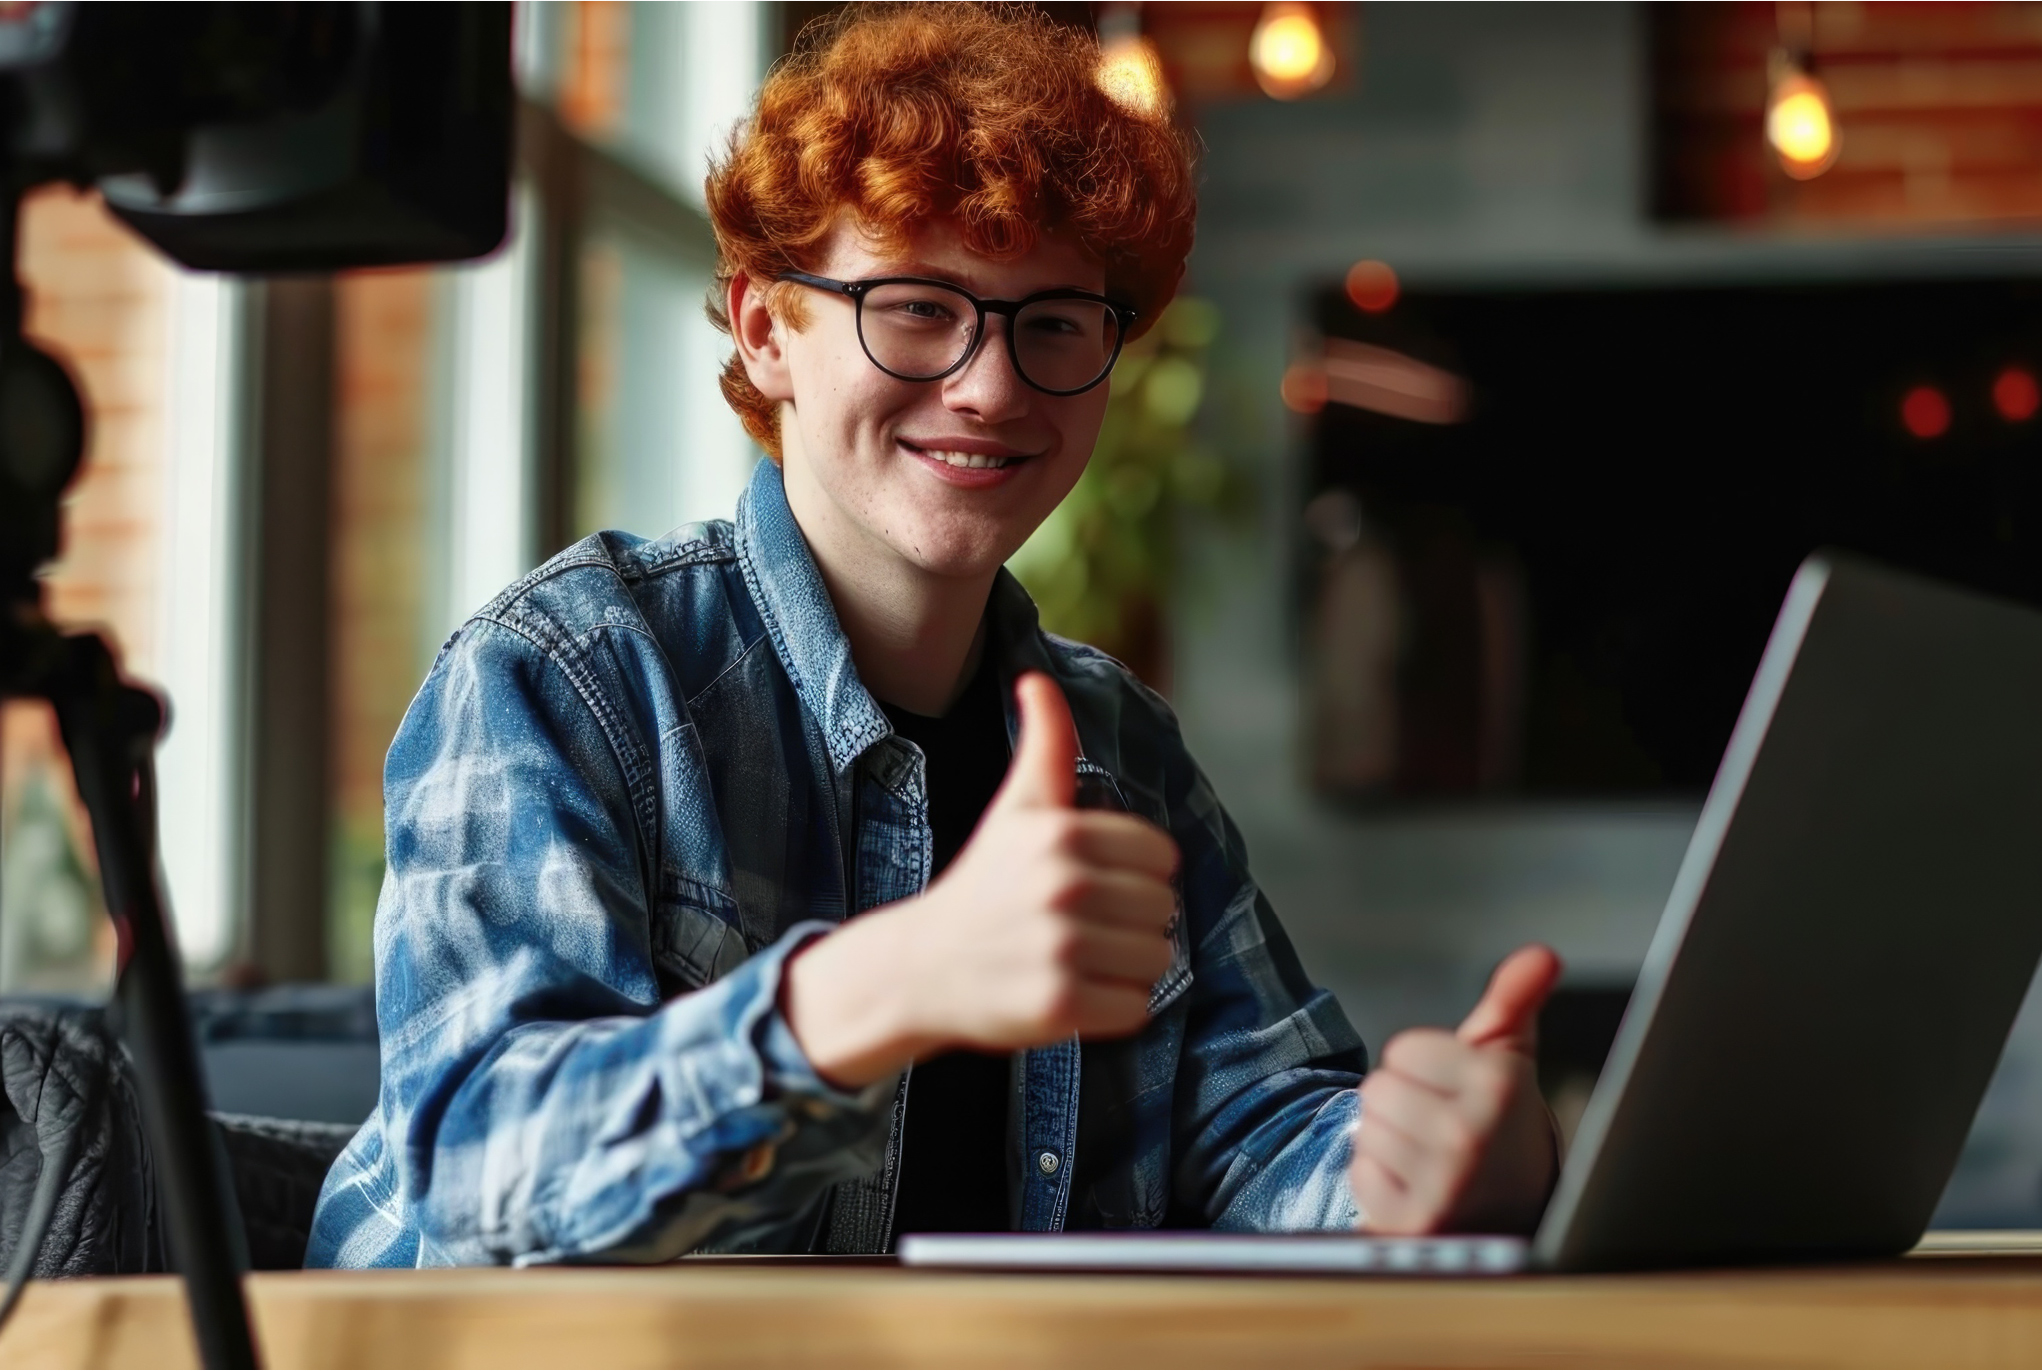 A man sitting at a desk with a laptop giving two thumbs up